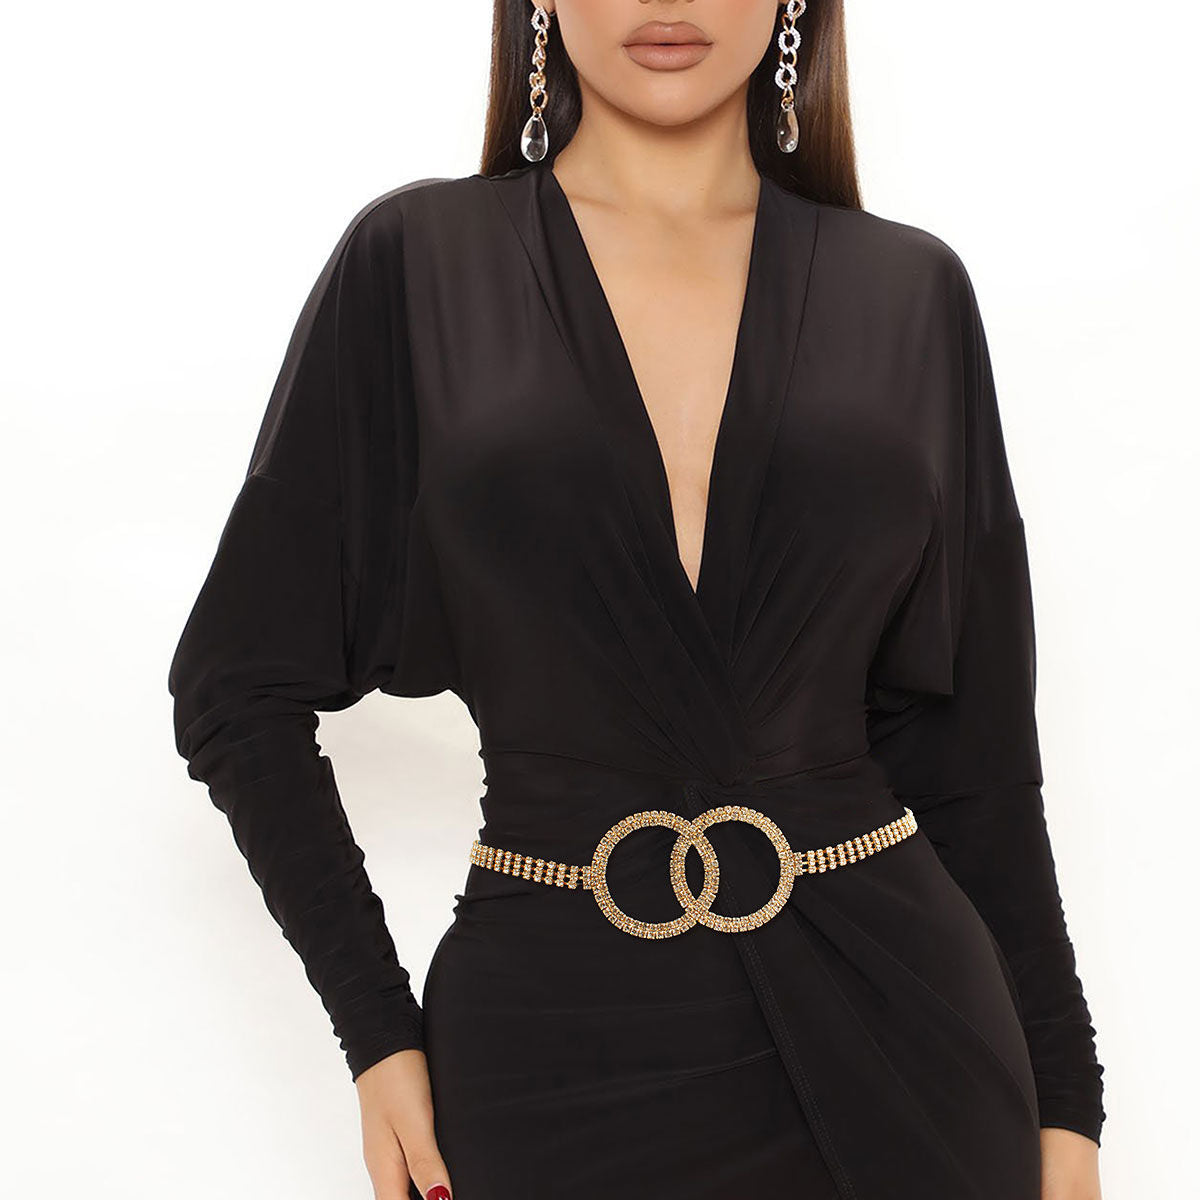 Gold Embellished Double Circle Chain Belt